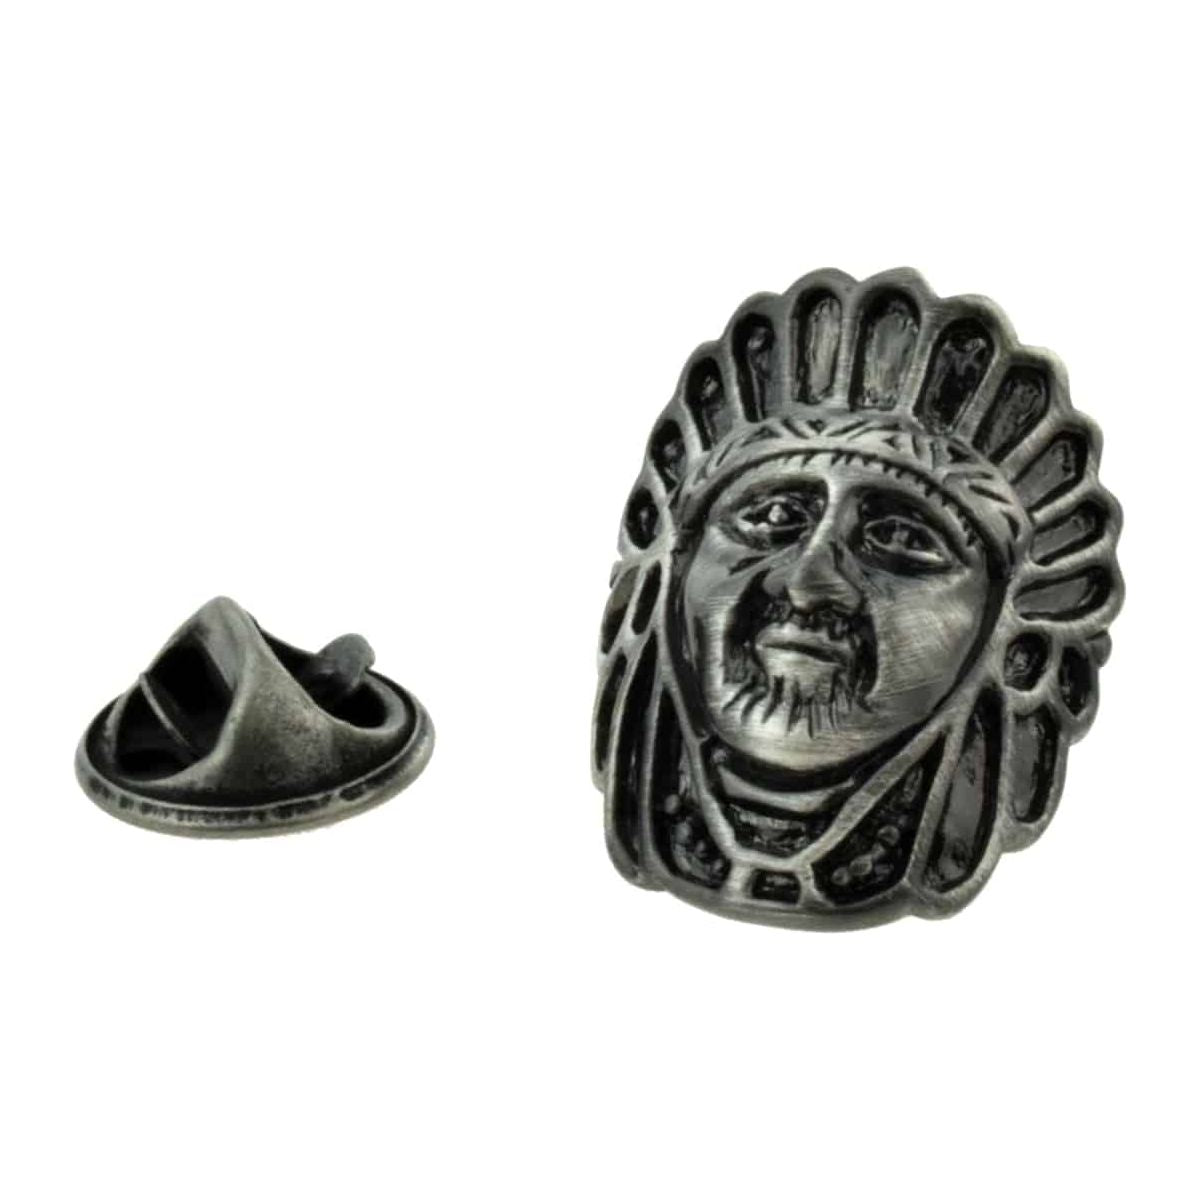 Red Indian Chief Lapel Pin Badge - Ashton and Finch